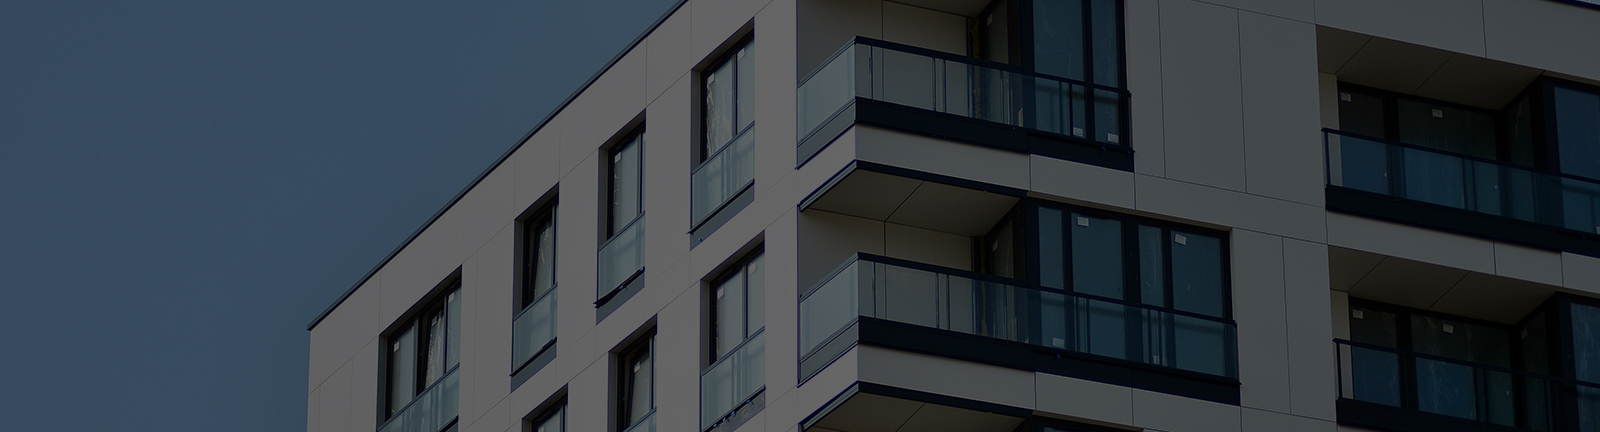 Office to Multifamily Conversions – how attractive is this conversion strategy for Commercial Real Estate (“CRE”) investors?